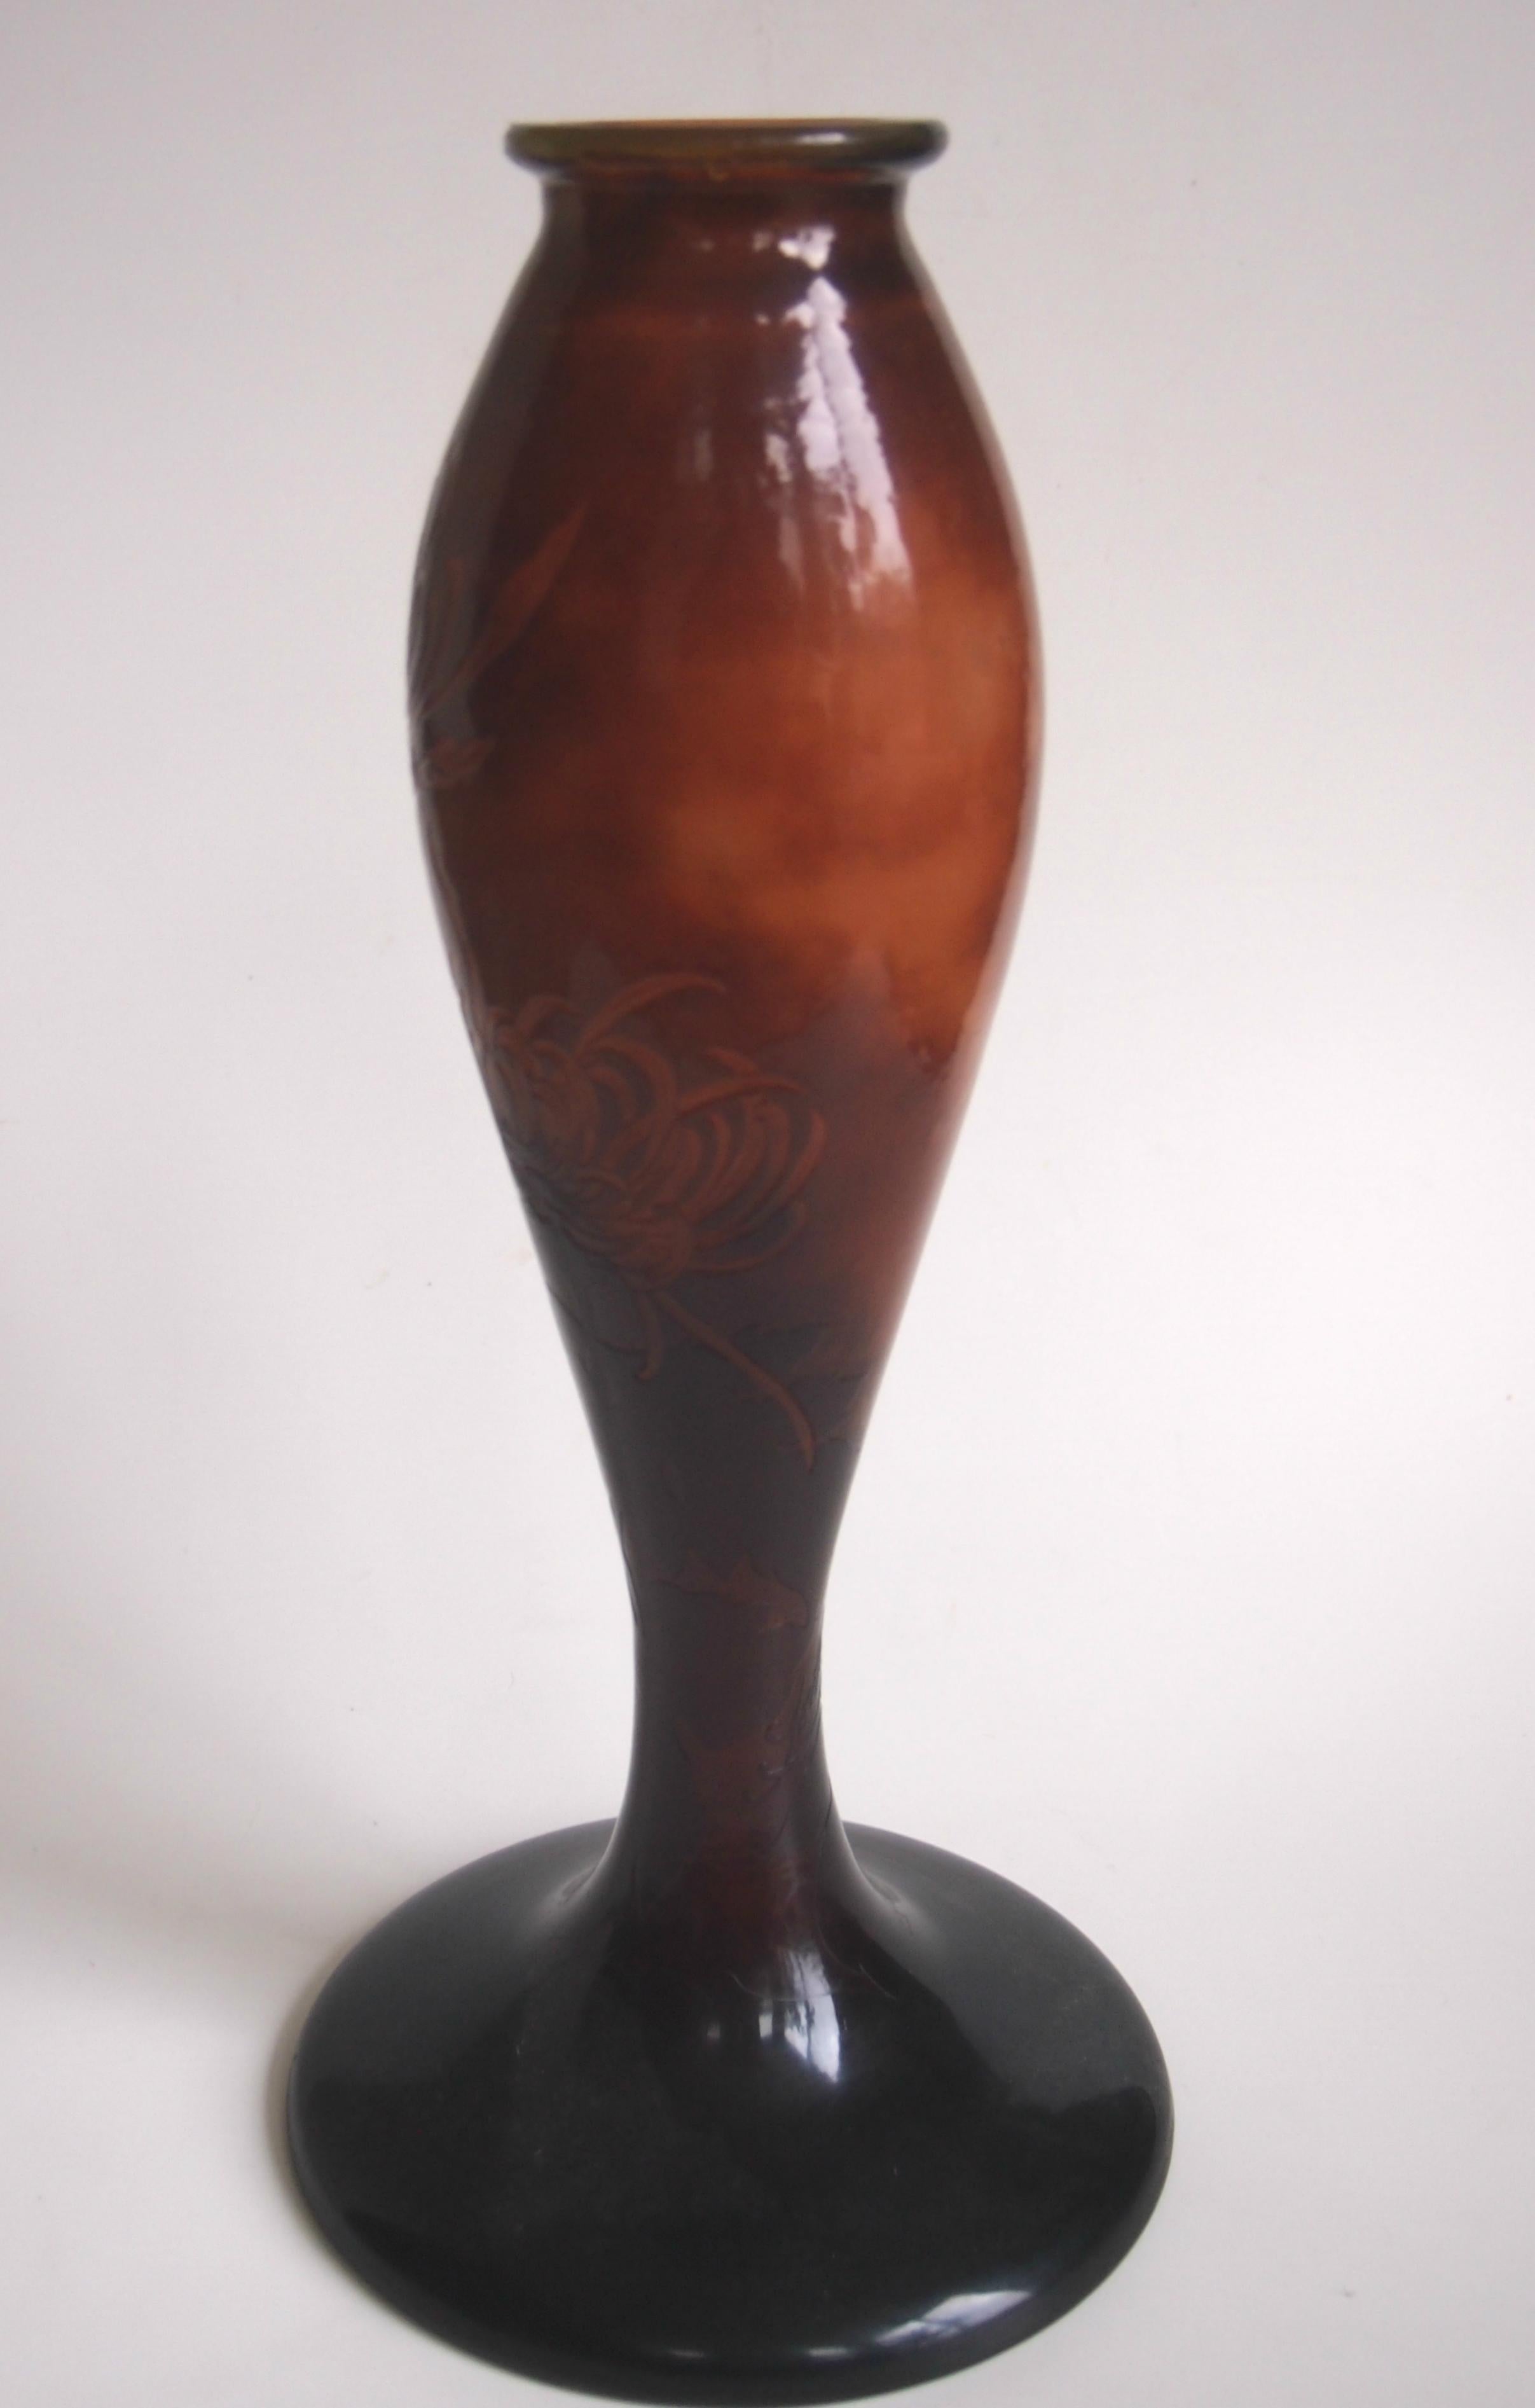 Rare and interesting early Emile Galle cameo vase, c14 inches tall, decorated with 1908 chrysanthemum series probably the 